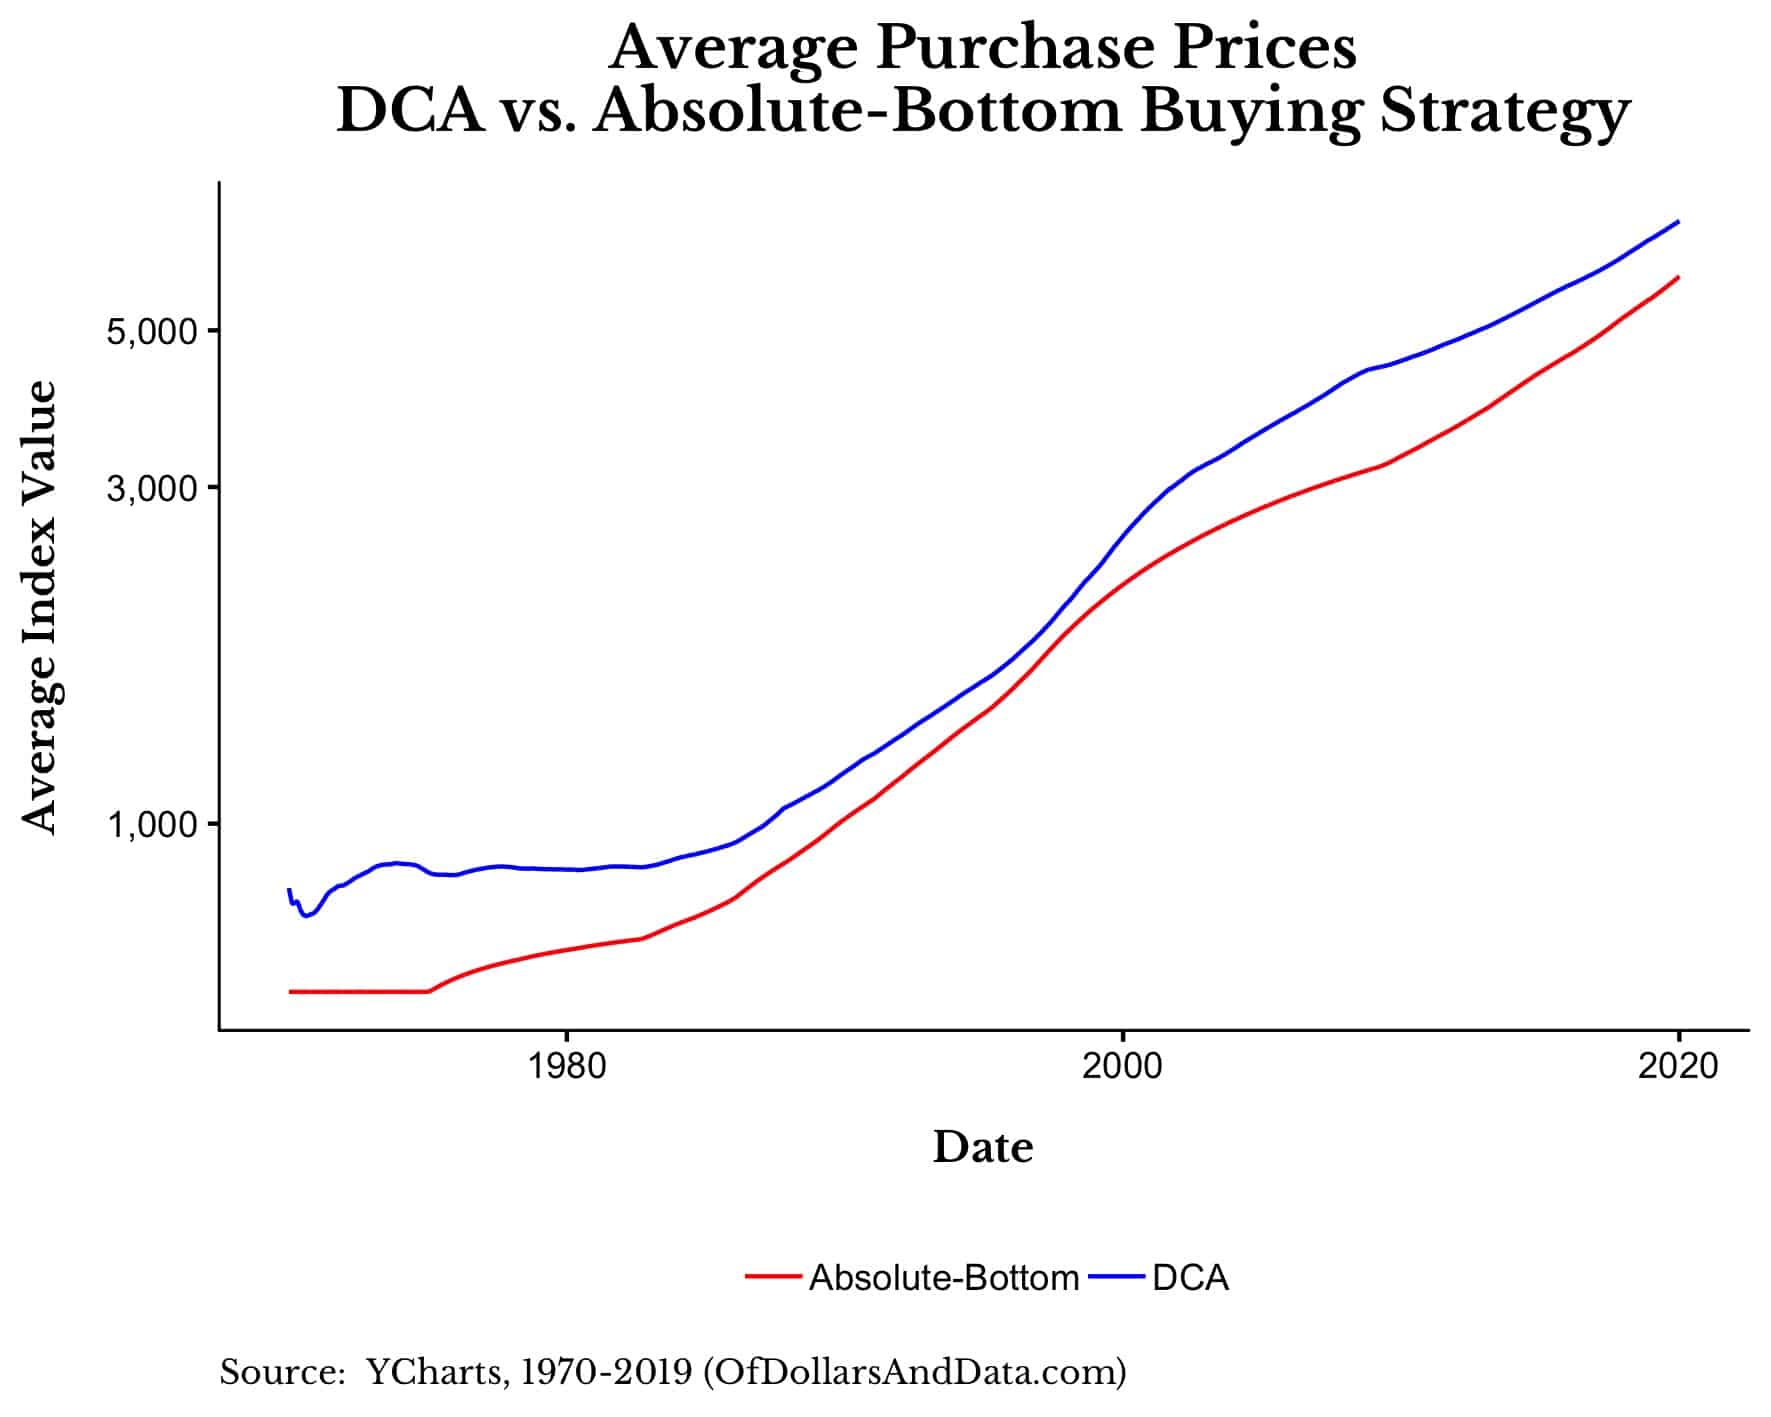 DCA vs. absolute bottom buying strategy average purchase prices for the Dow from 1970-2019.